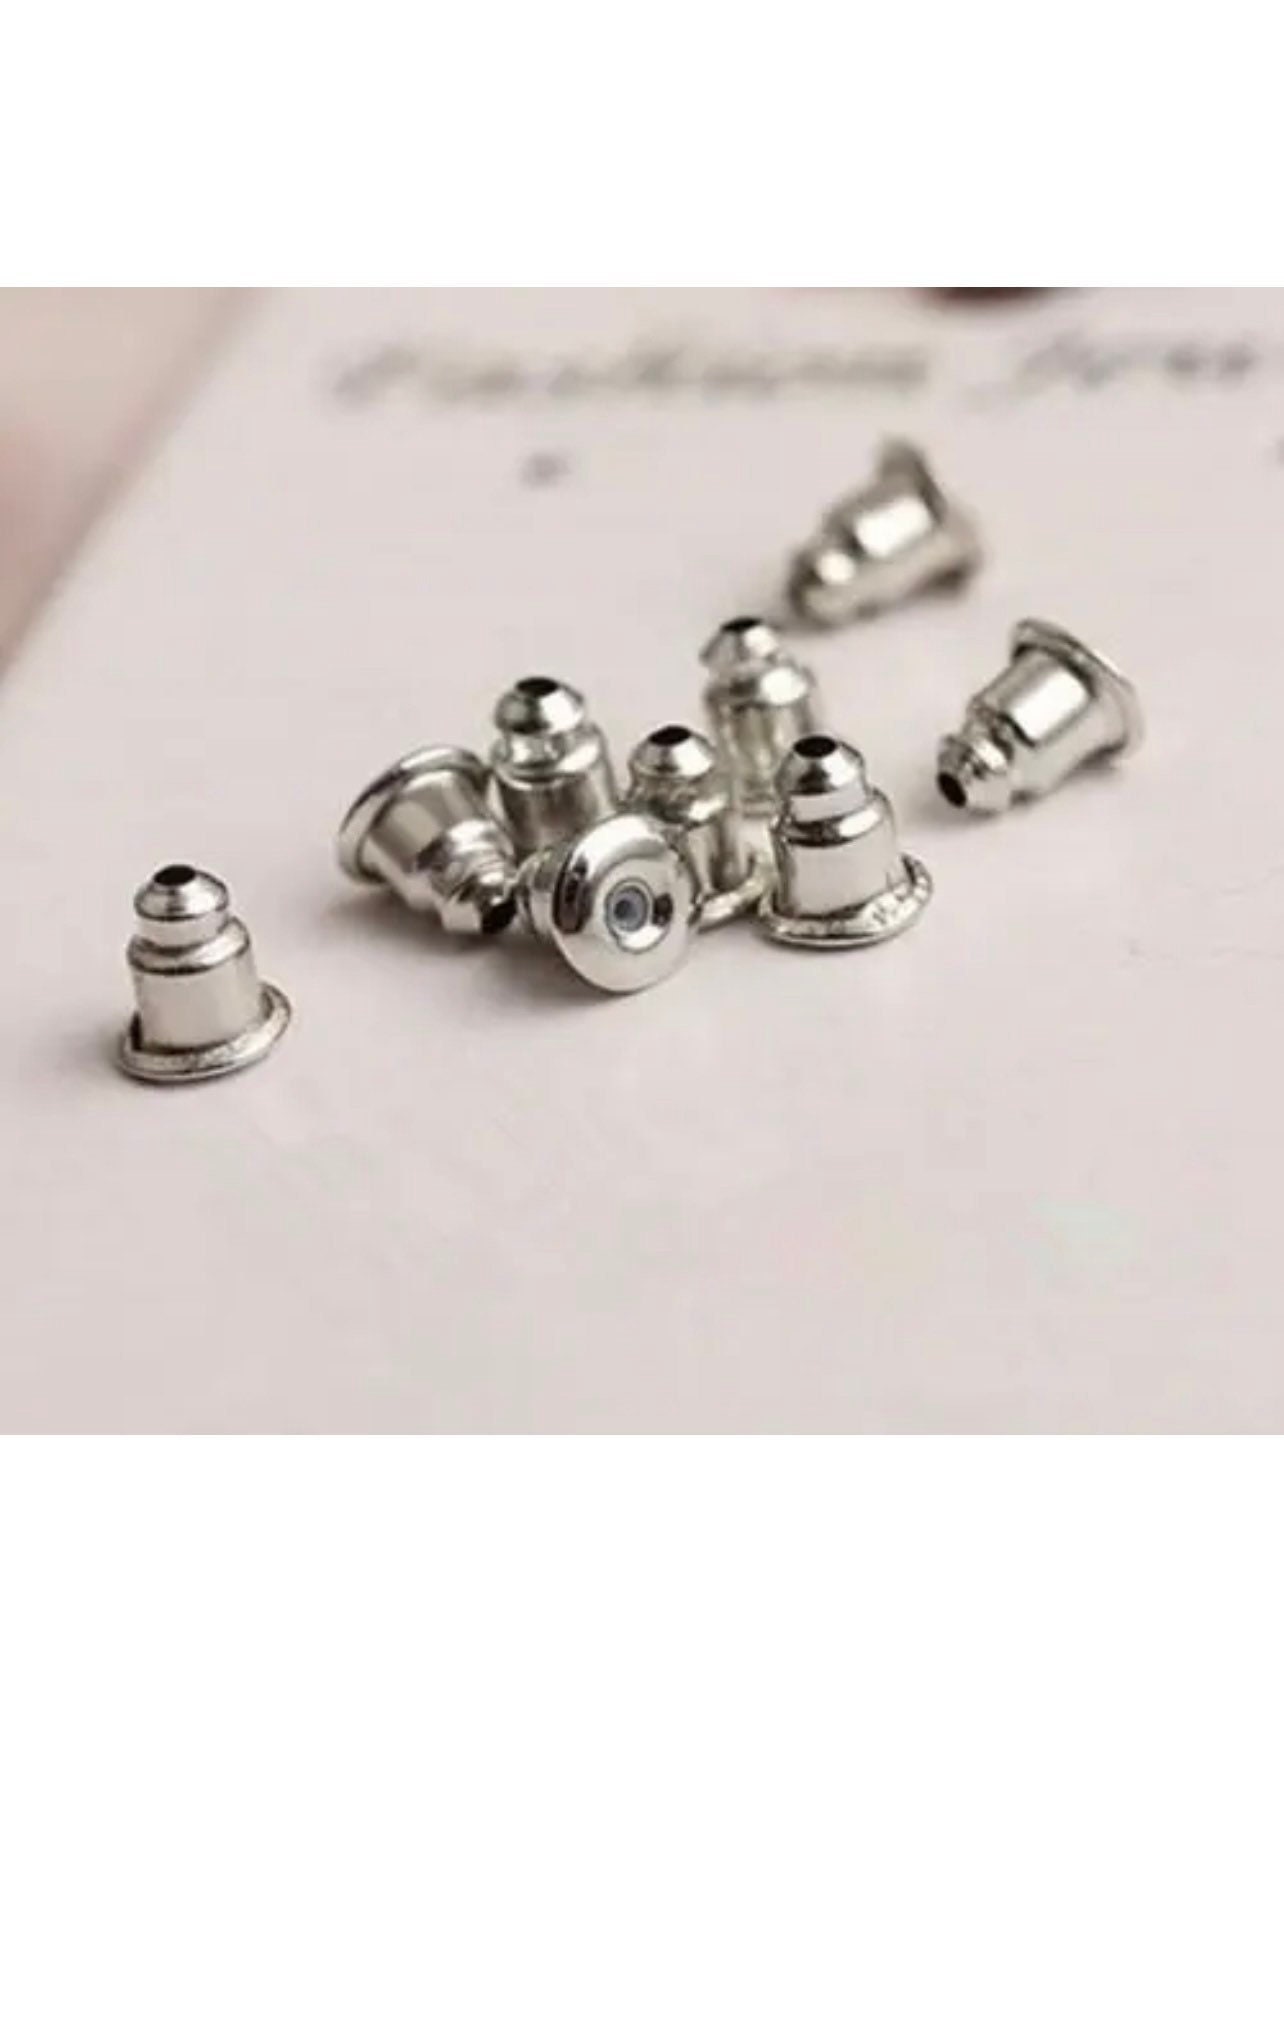 100 Pieces Stainless Steel Earring Back 4x6mm Silver Tone Metal